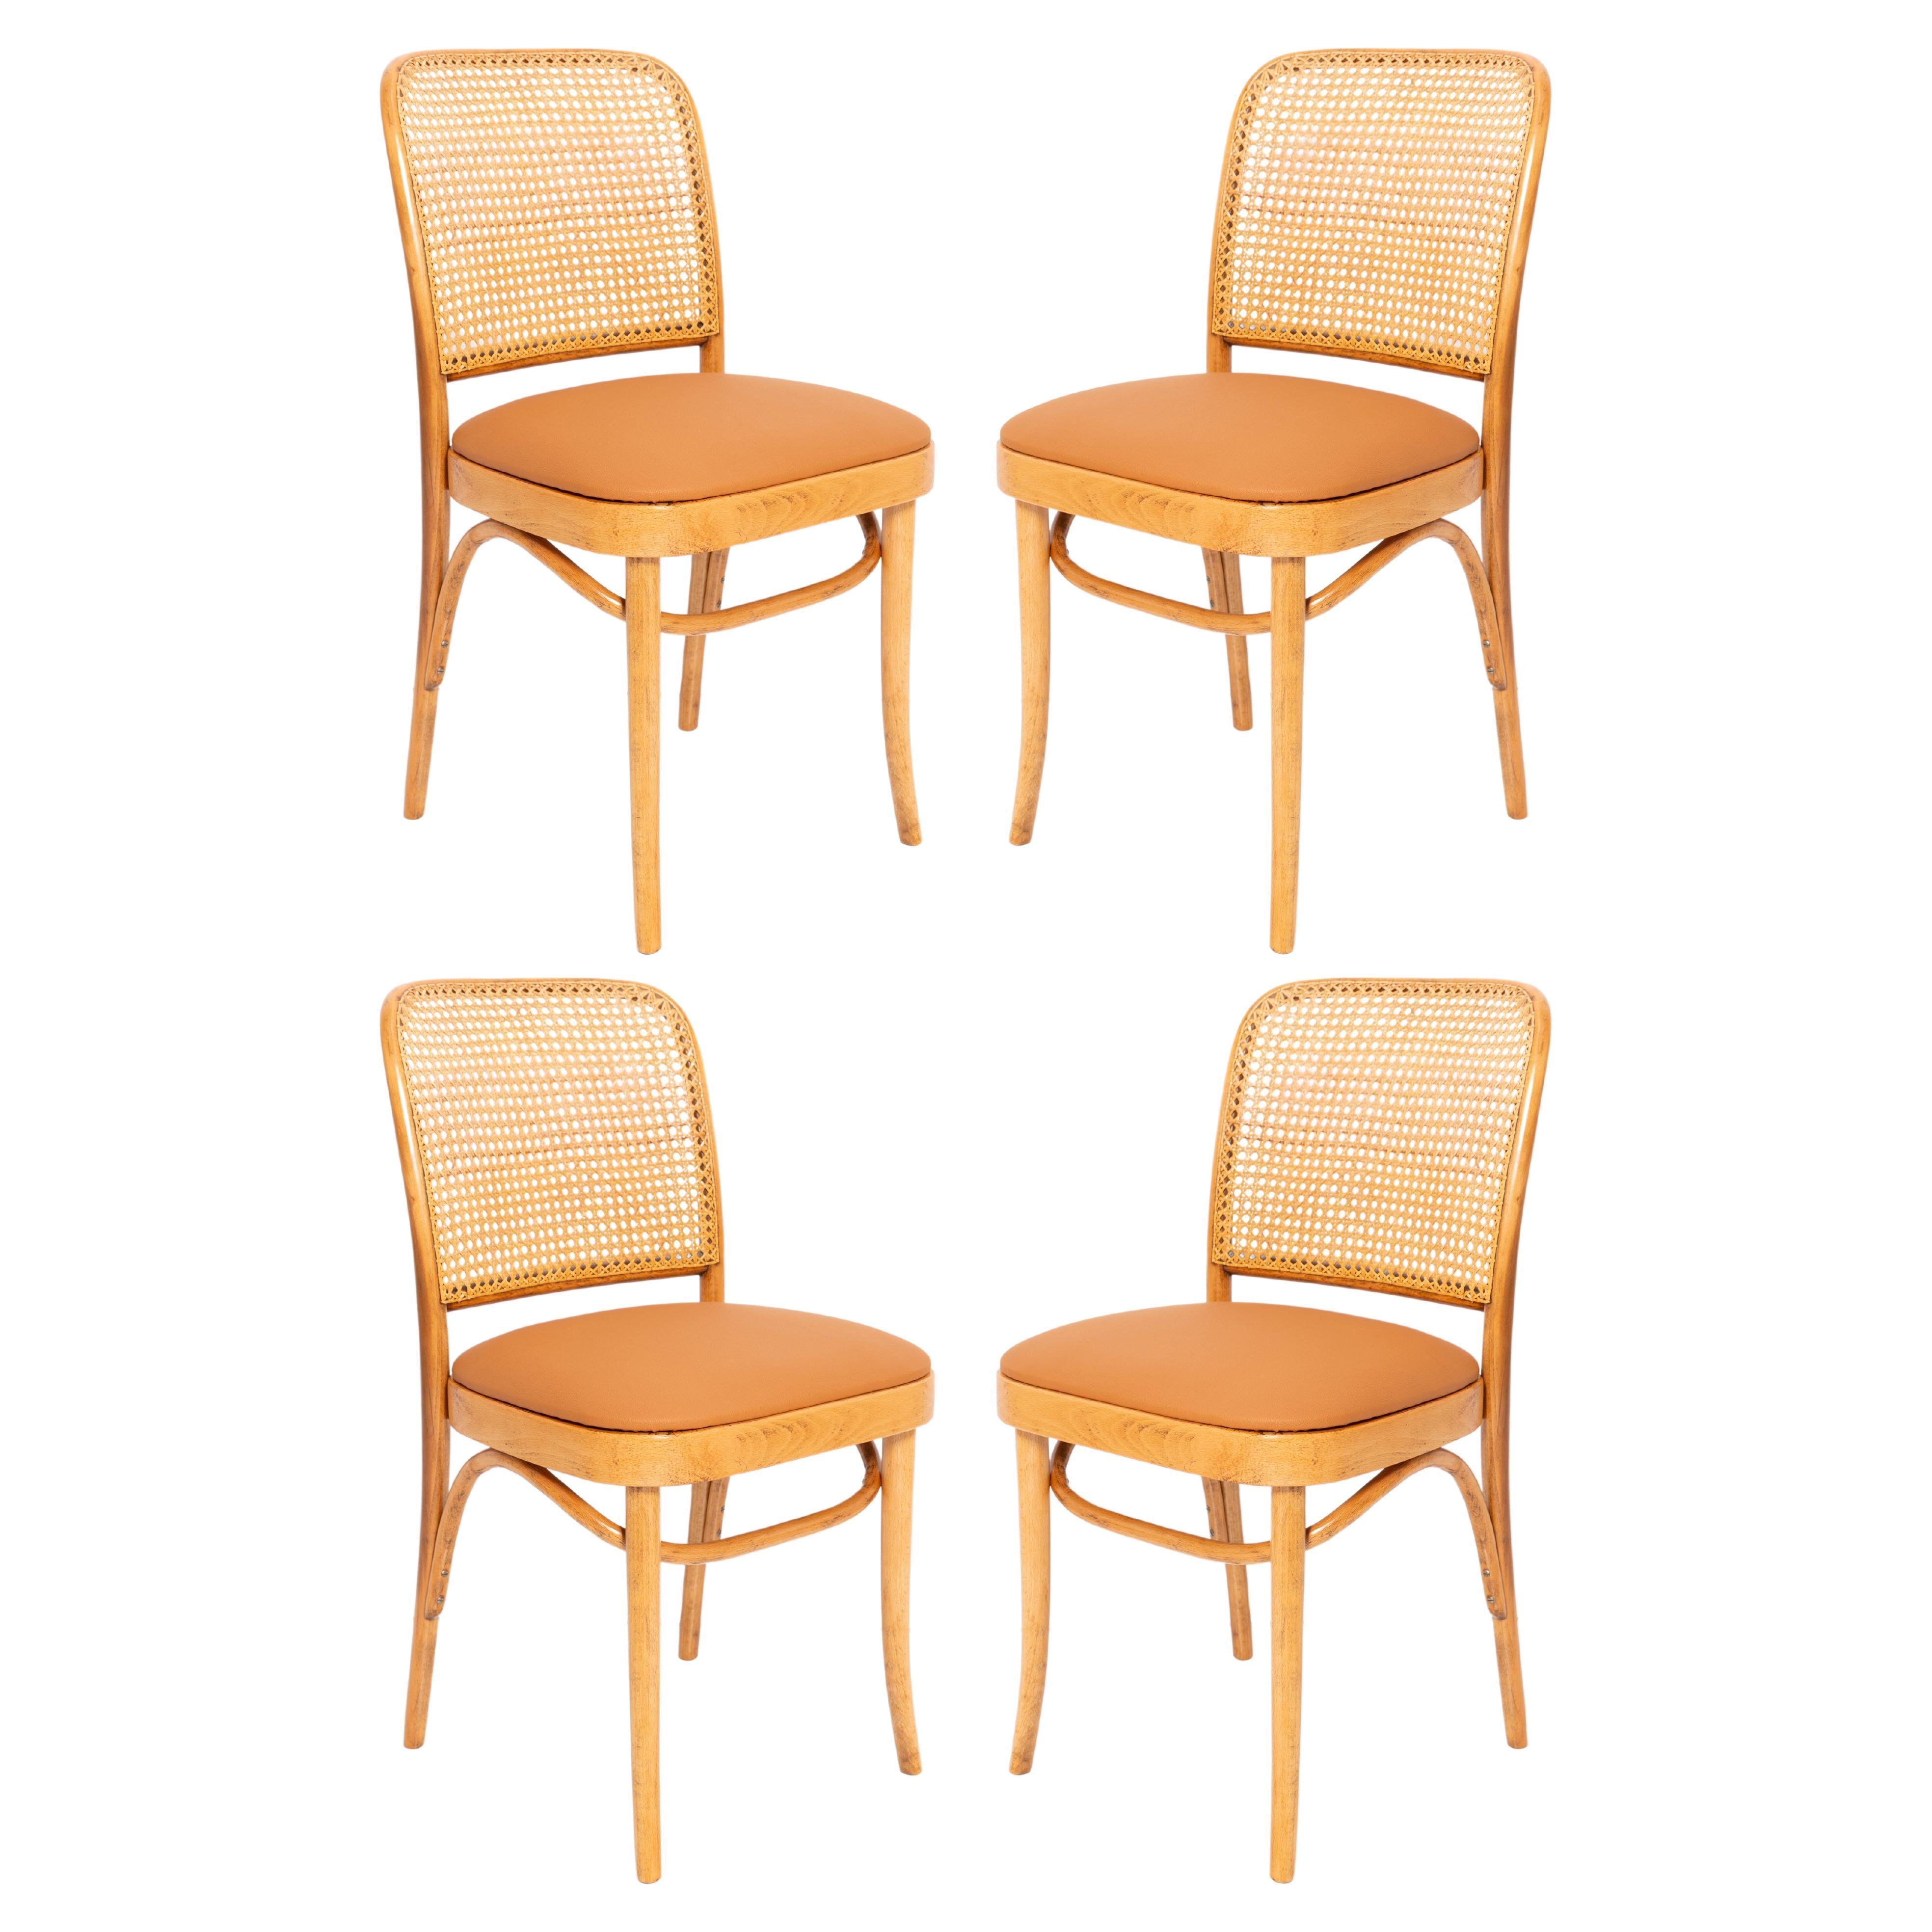 Set of Four Mid-Century Camel Faux Leather Thonet Wood Rattan Chairs, 1960s